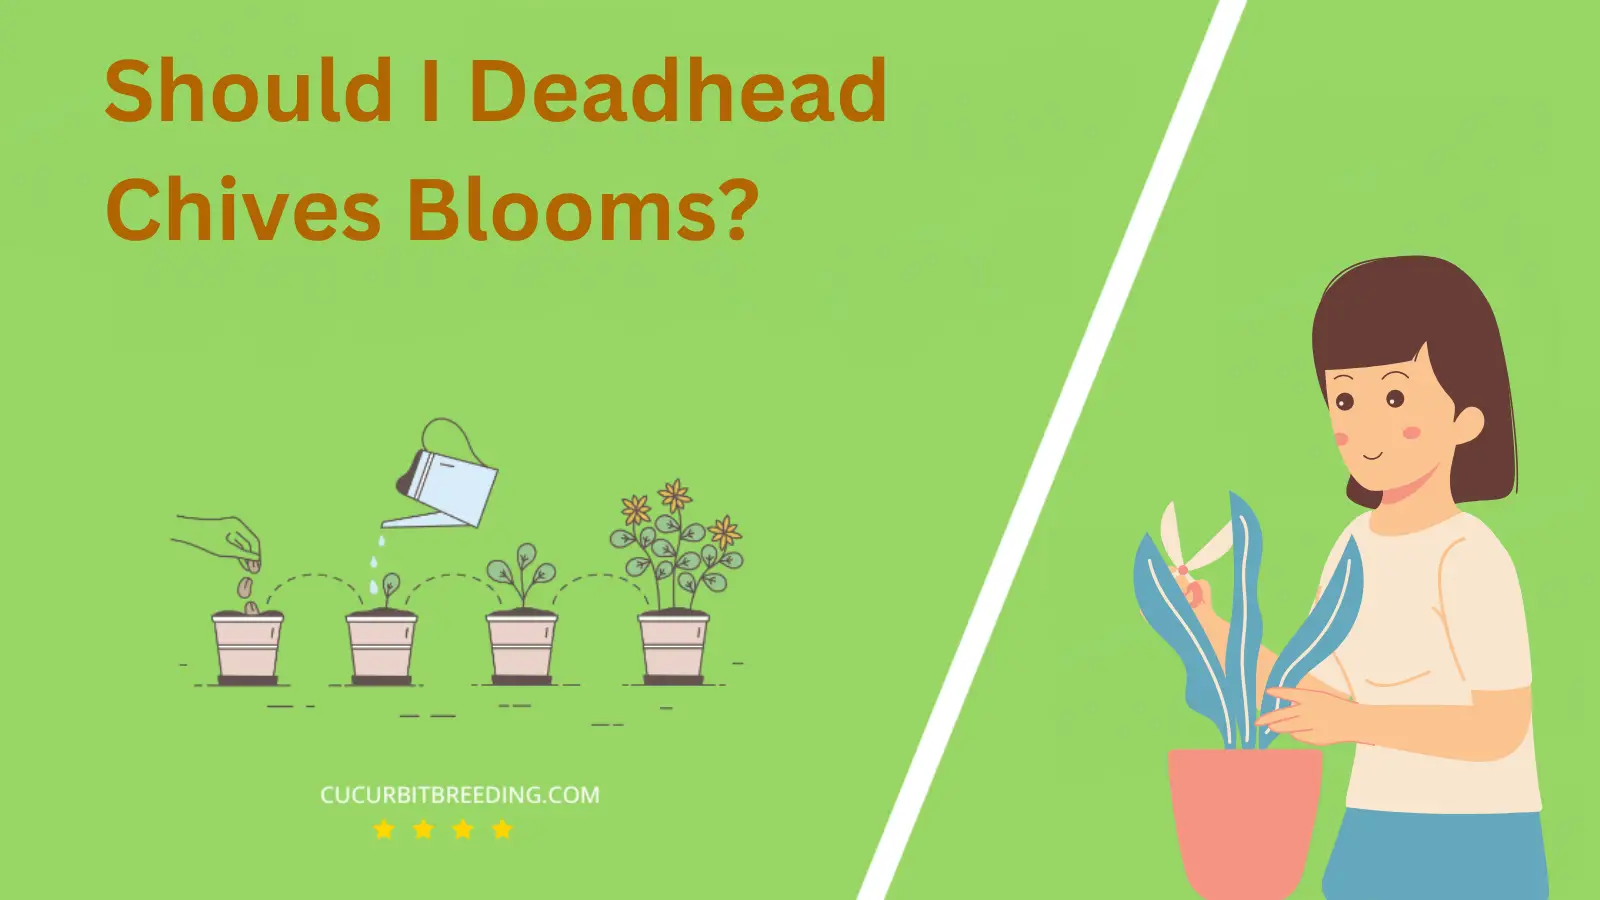 Should I Deadhead Chives Blooms?